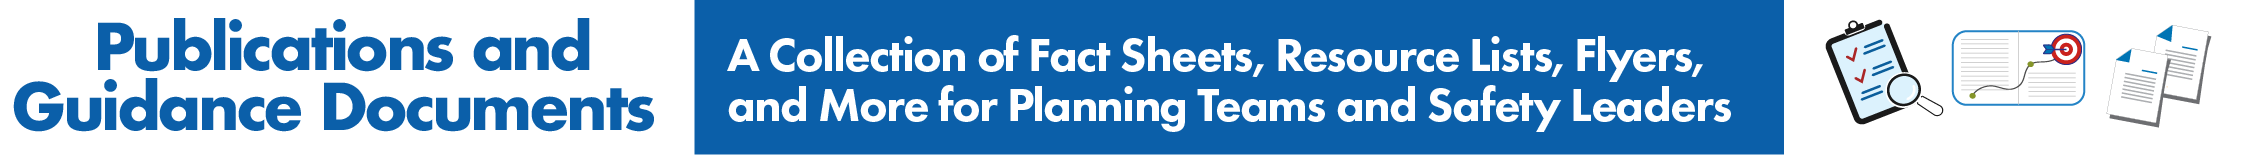 Publications and Guidance Documents - A Collection of Fact Sheets, Resource Lists, Flyers and More for Planning Teams and Safety Leaders